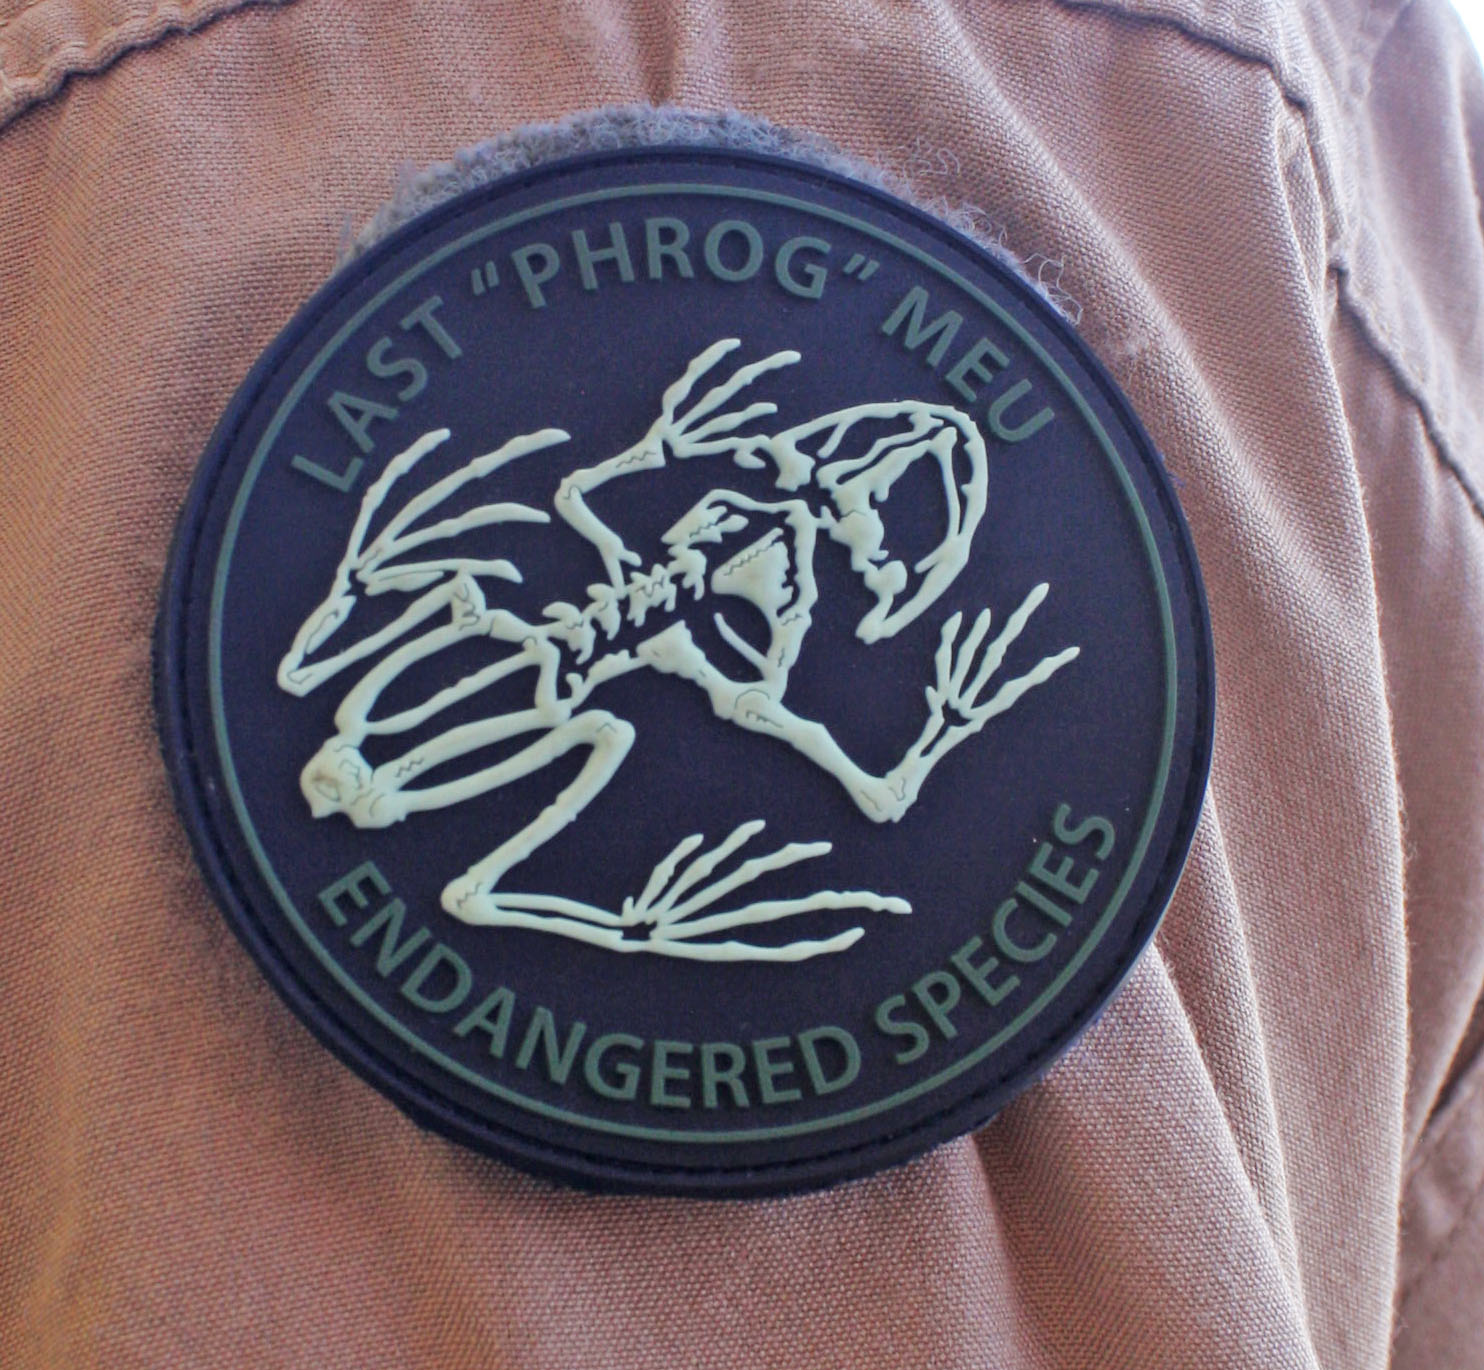  A patch worn by Capt. Brett Bishop commemorates the last CH-46E squadron mission with Japan-based 31st Marine Expeditionary Unit. US Naval Institute Photo 